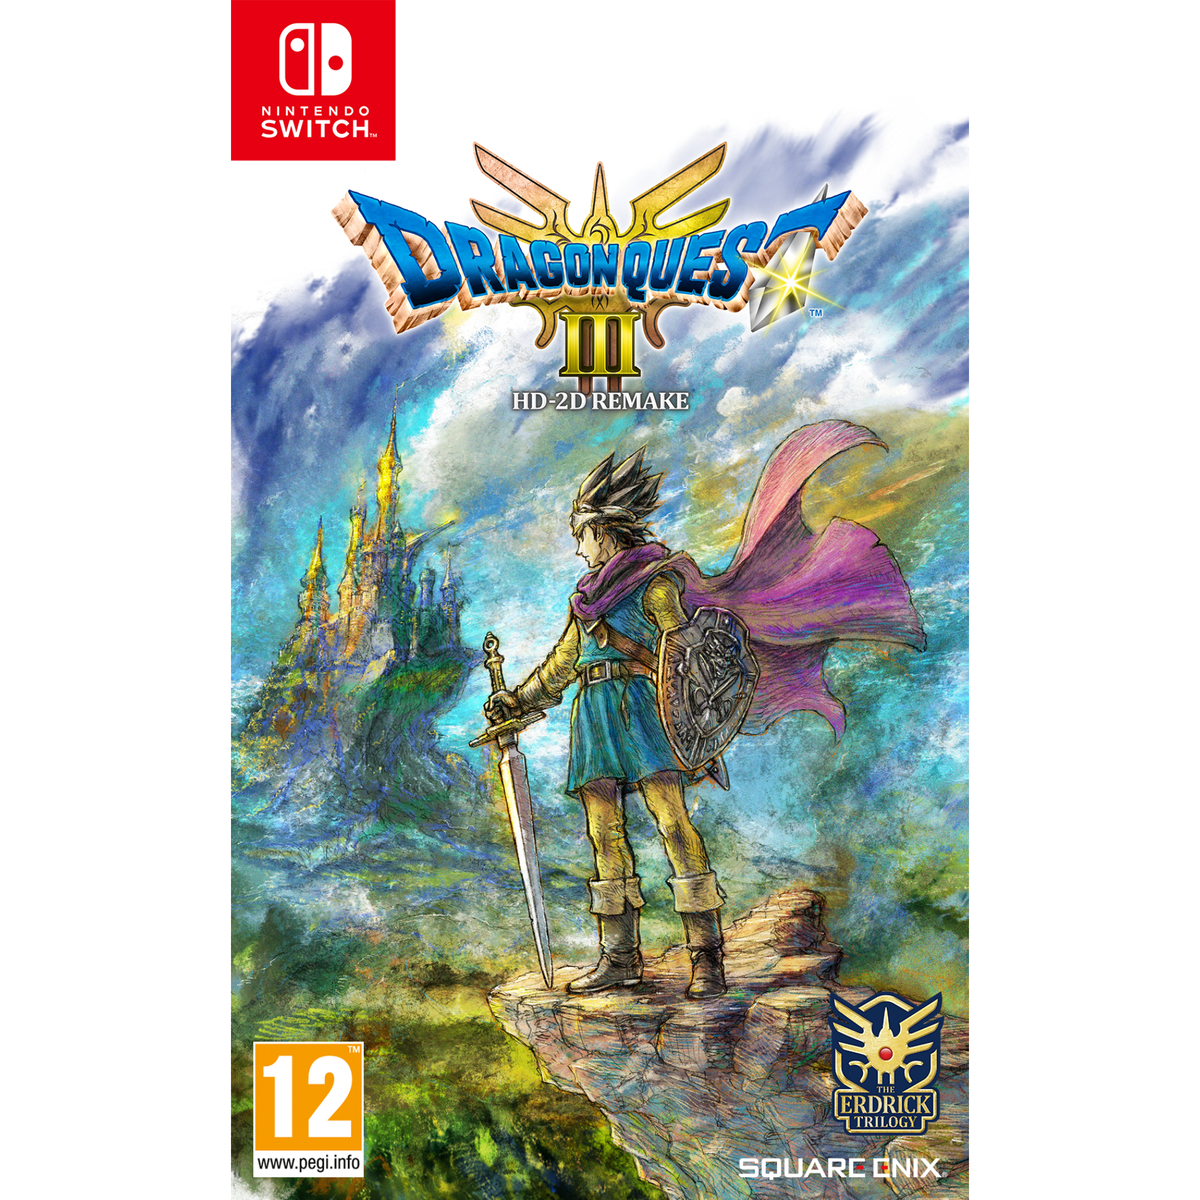 PRE-ORDER Dragon Quest III HD-2D Remake for Nintento Switch